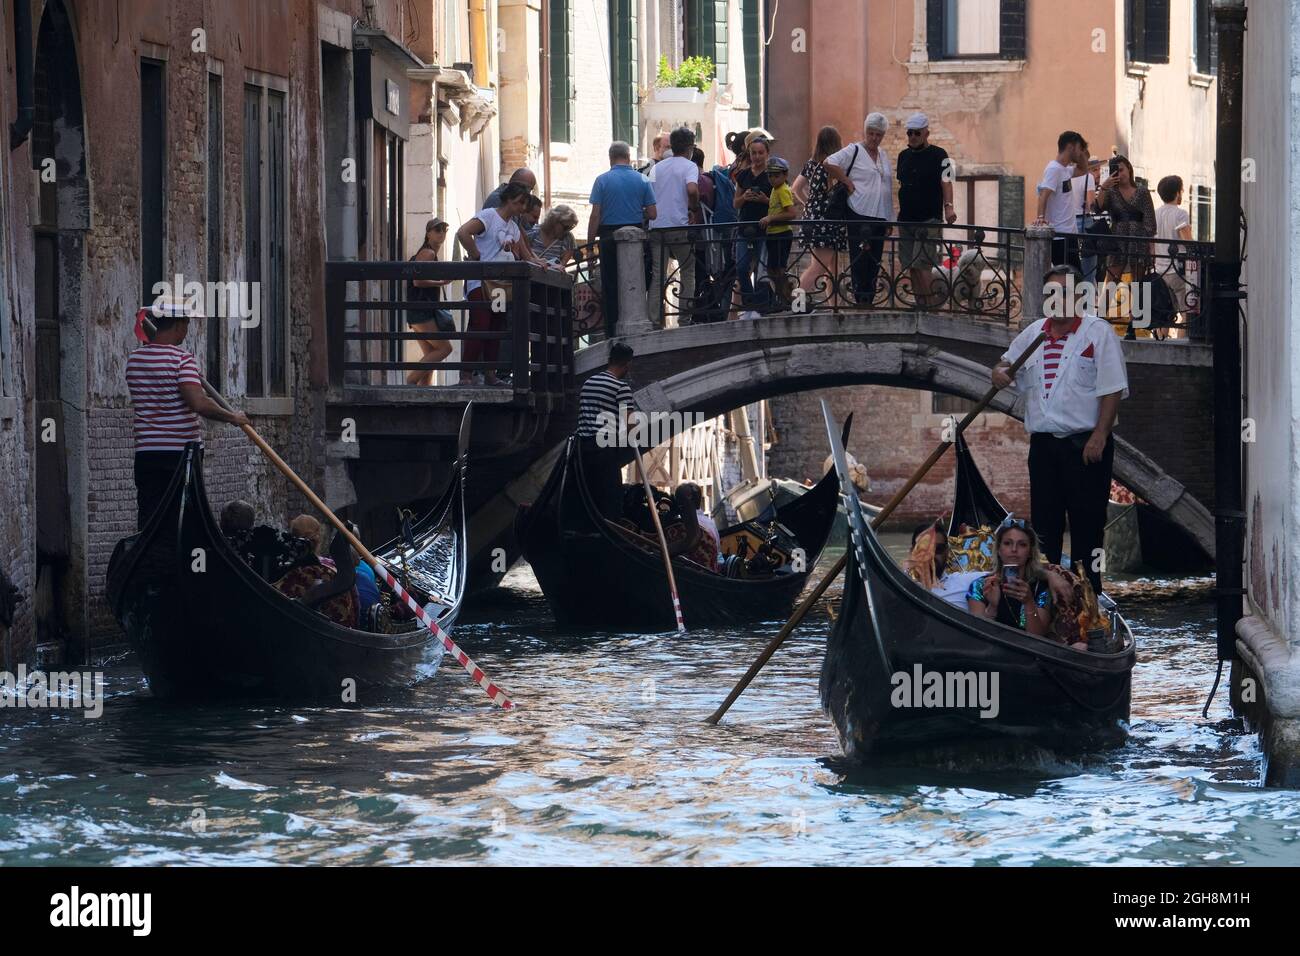 Tourists visit Venice as the municipality prepares to charge them up to 10 Euro for entry into the lagoon city, in order to cut down the number of visitors, in Venice, Italy, September 5, 2021. Picture taken September 5, 2021. REUTERS/Manuel Silvestri Stock Photo